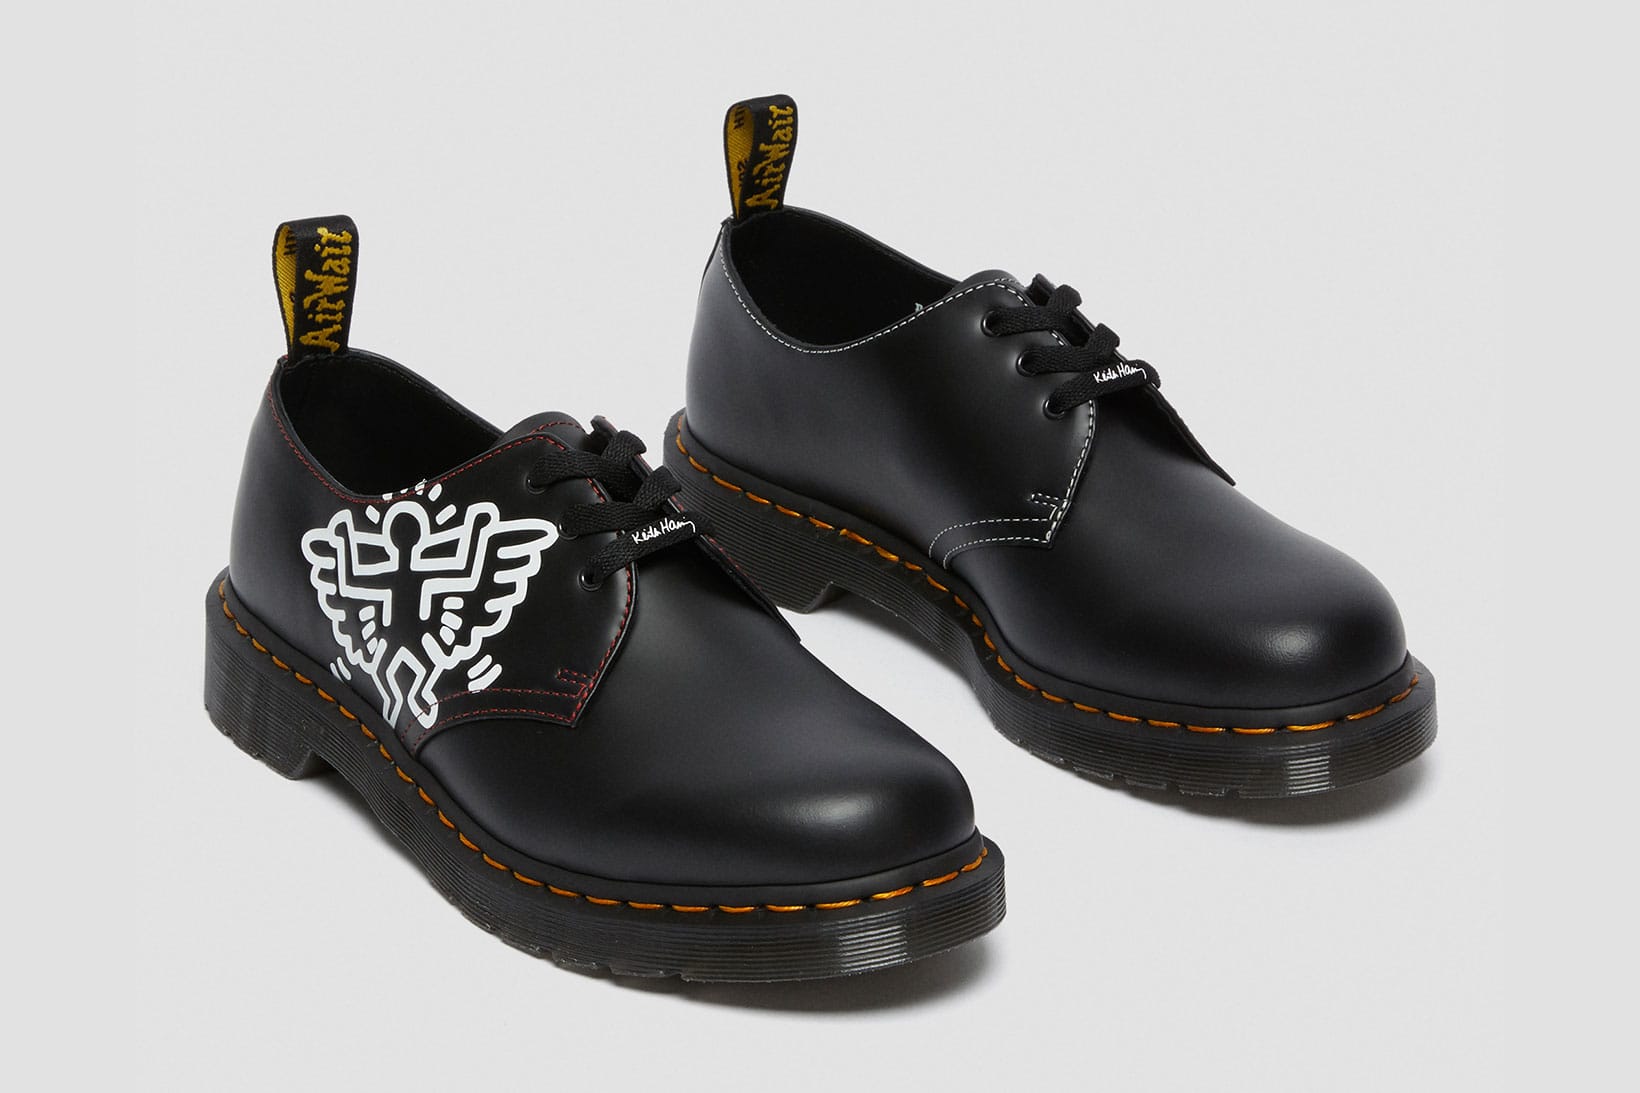 Keith Haring x Dr. Martens 1460, 1461 Boots Drop | Hypebae